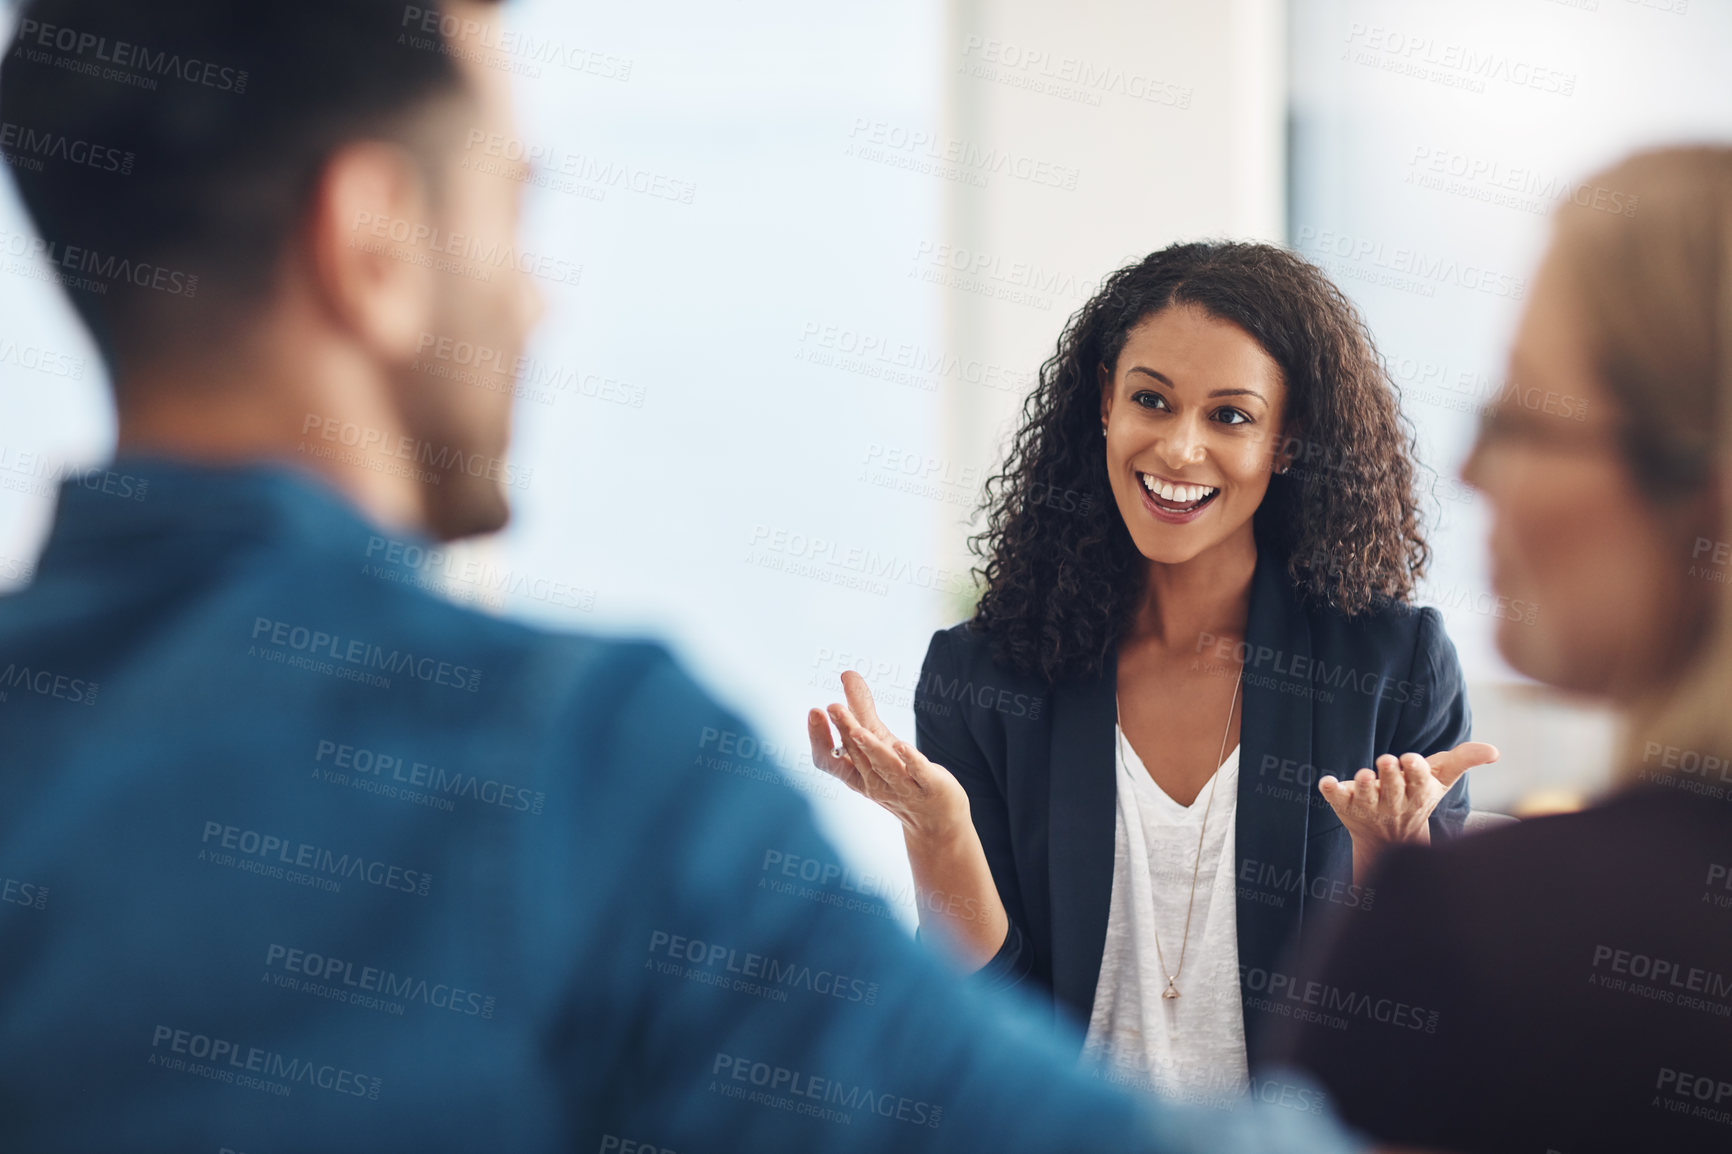 Buy stock photo Shot of a young therapist speaking to a couple during a counseling session